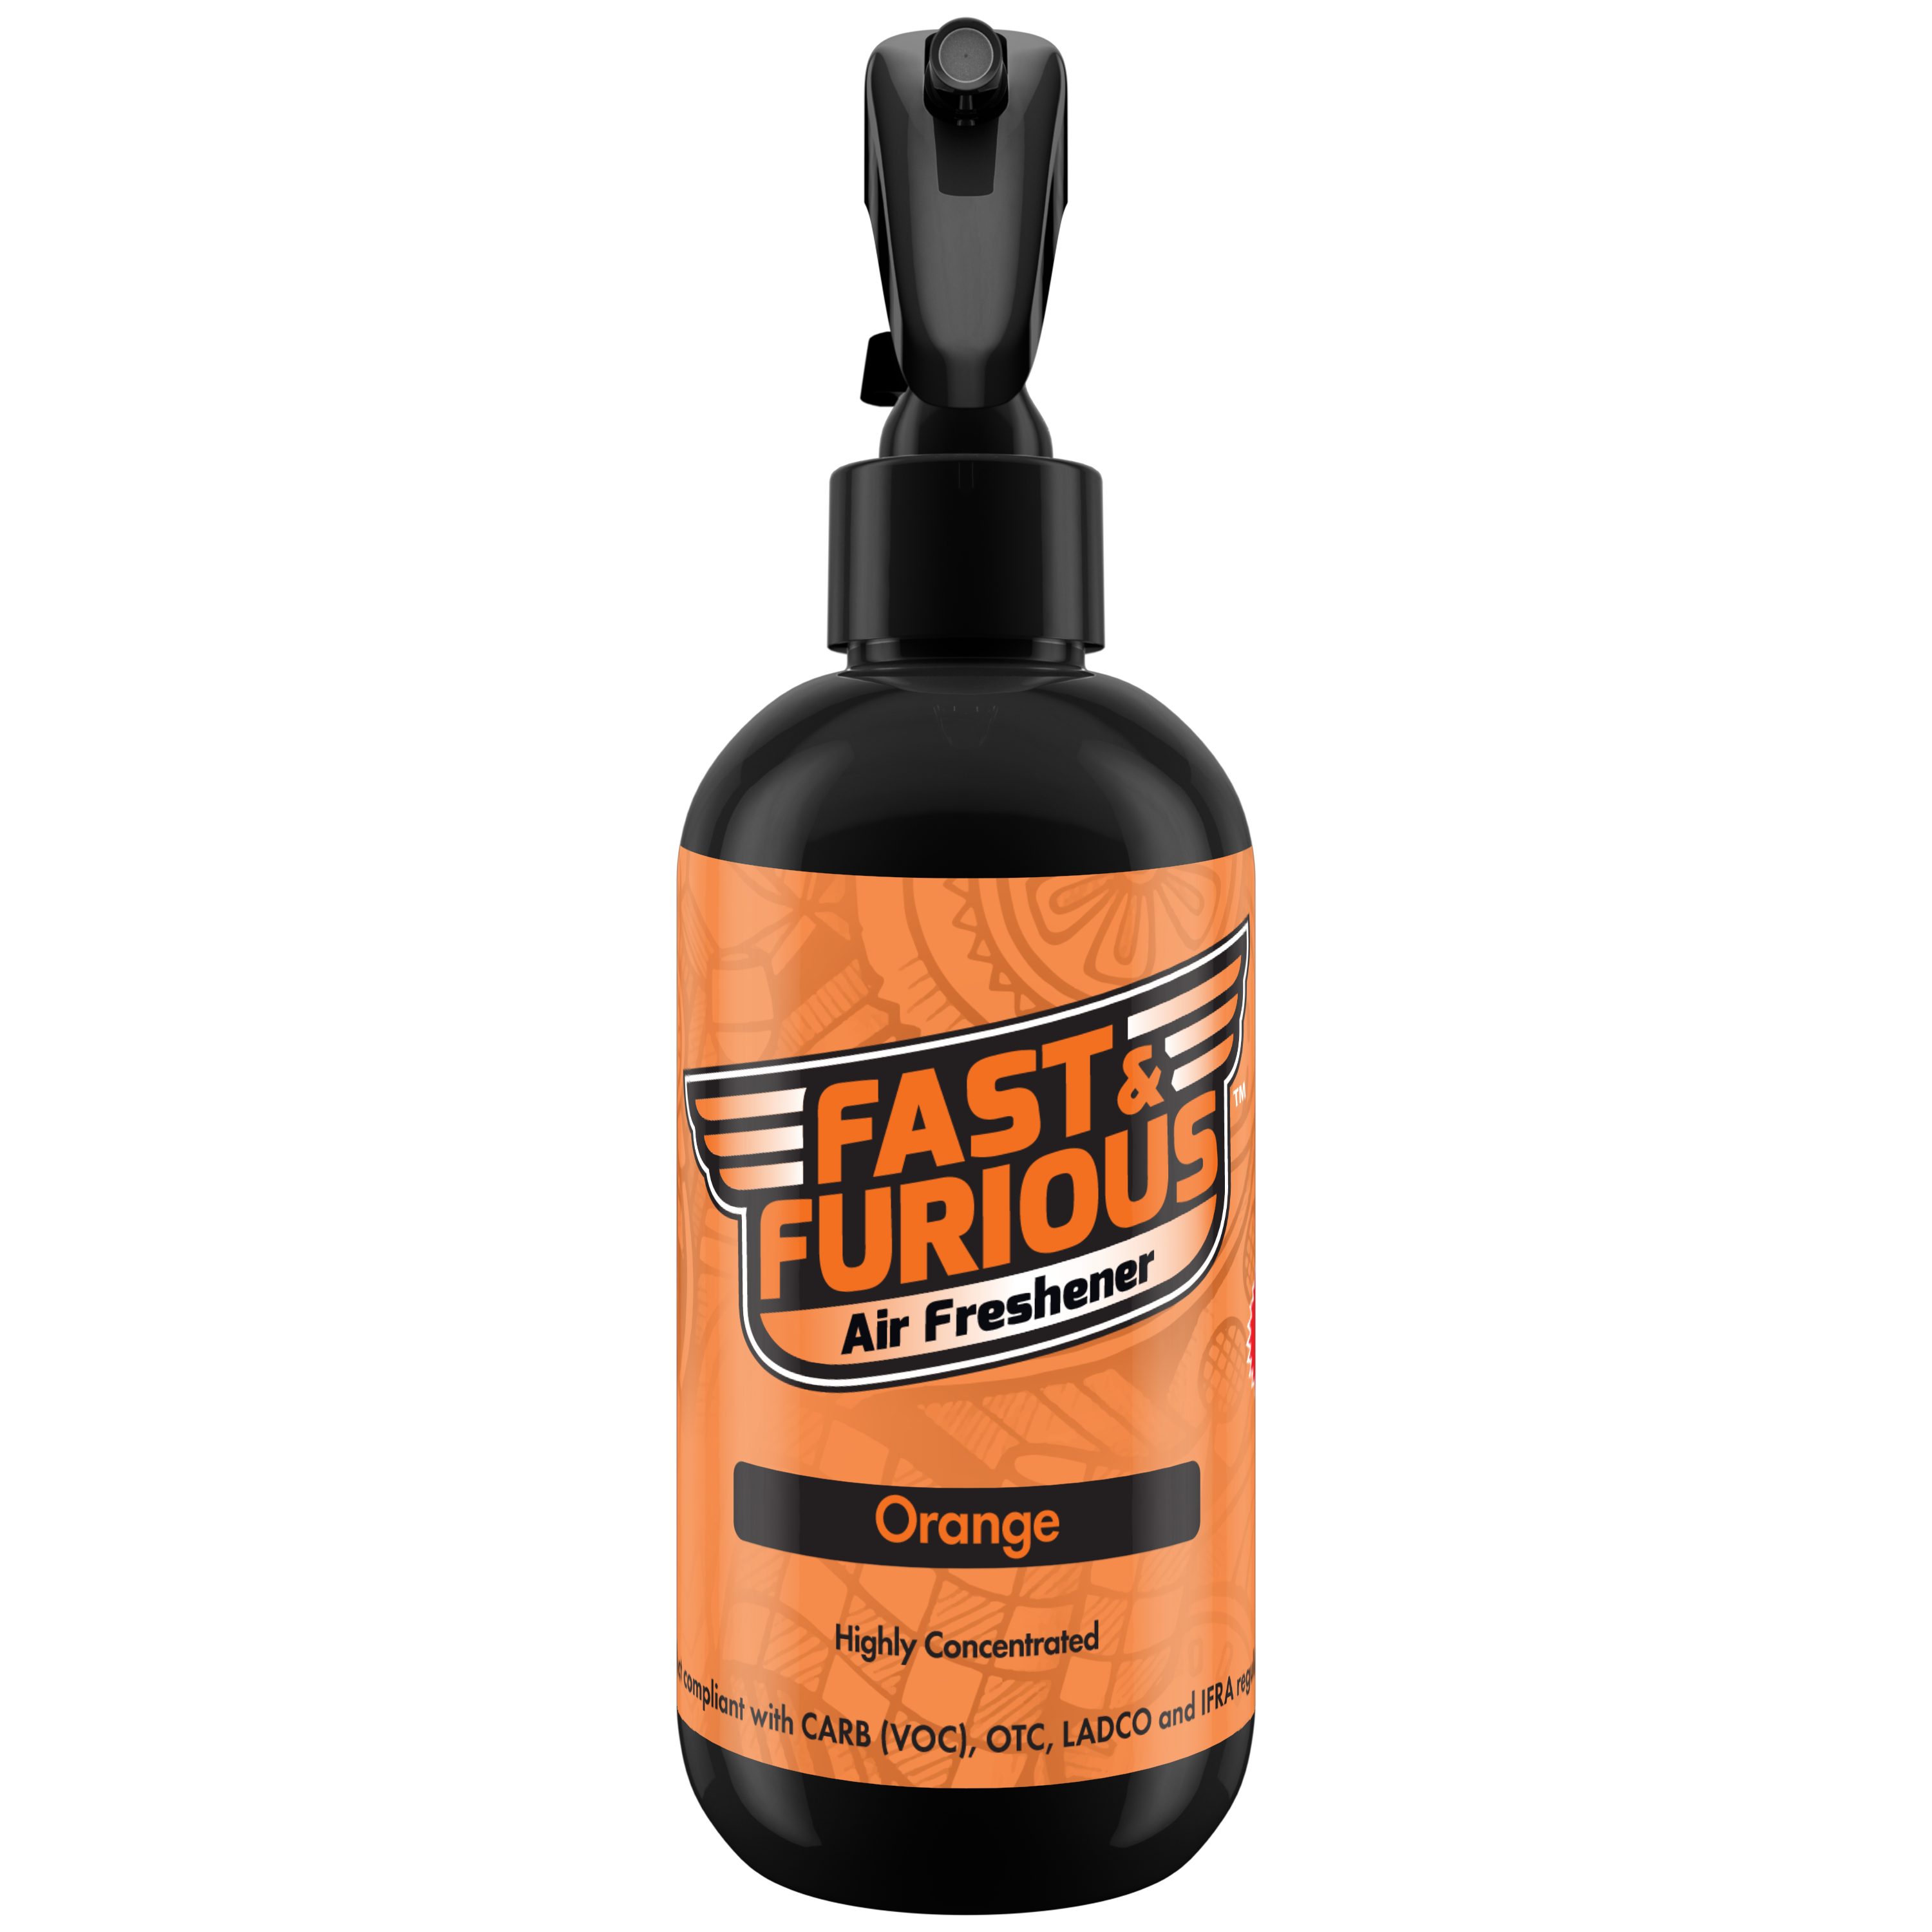 Fast and Furious Air Freshener - Orange Scent Size: 8oz